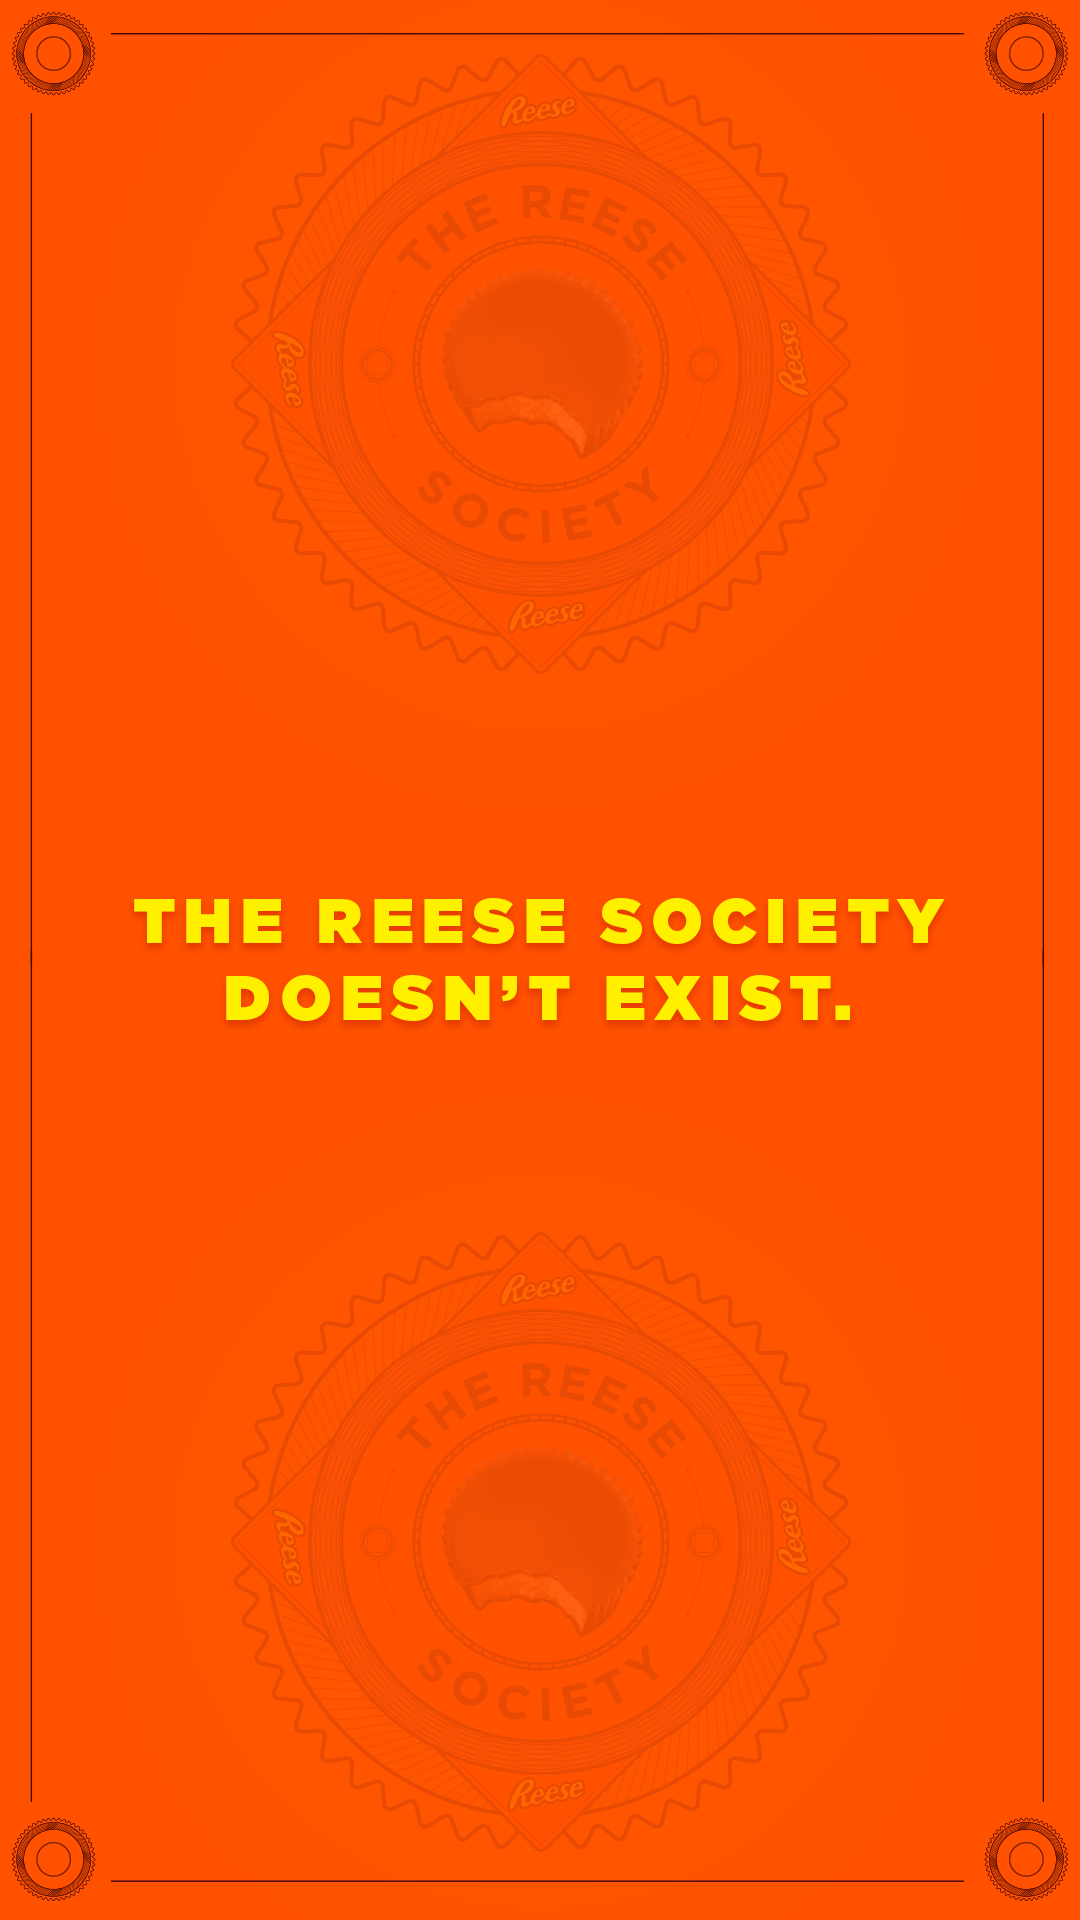 Reese-Society-IG_0057_The-Reese-Society-doesn’t-exist.png